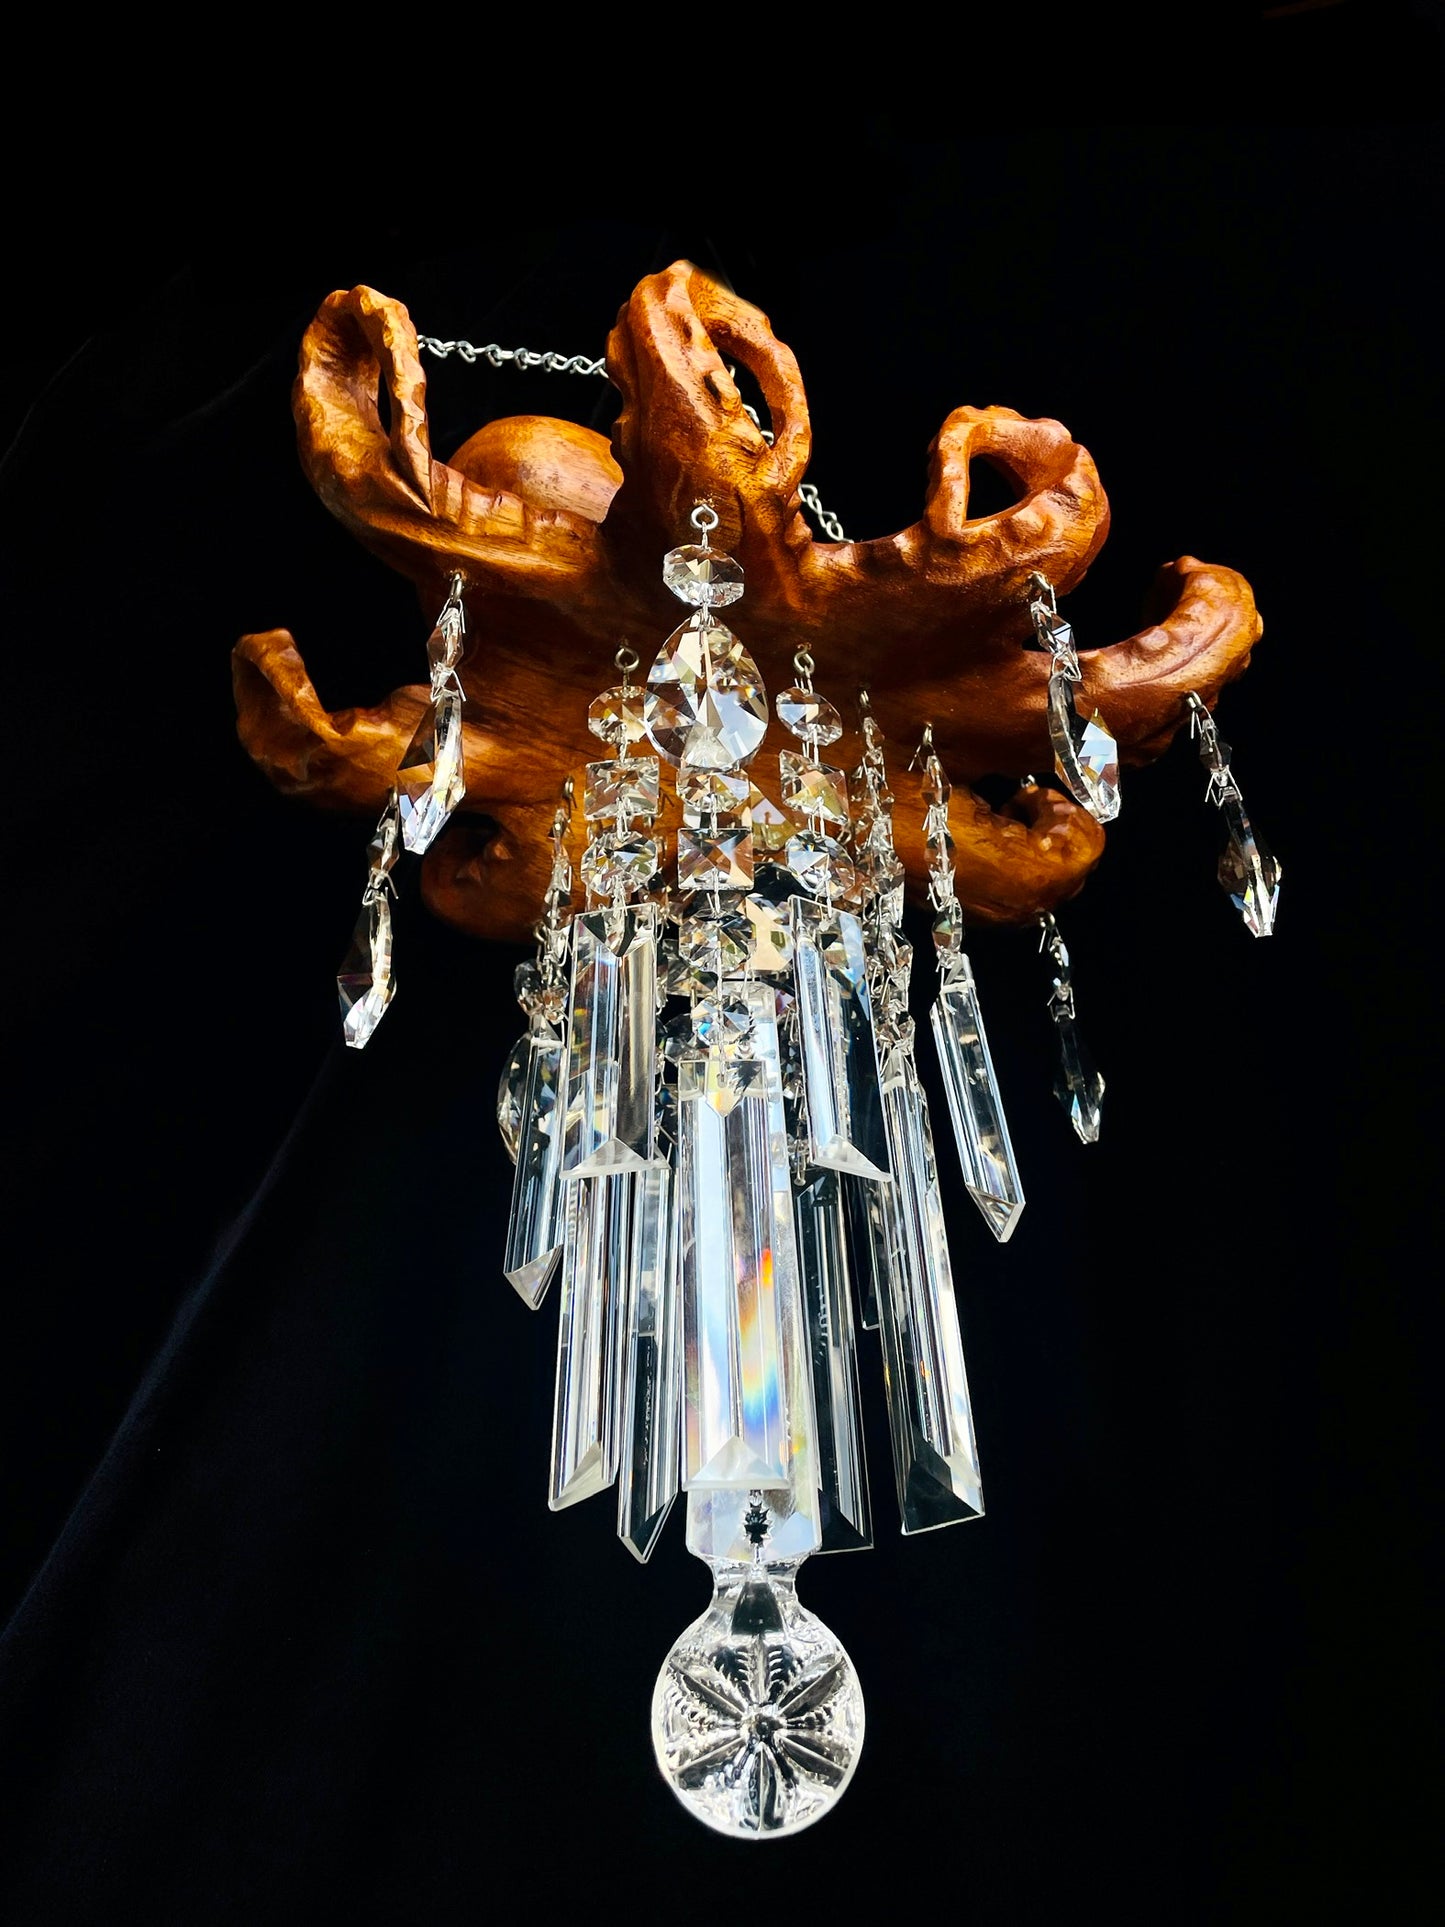 Chandelier crystal octopus by Dazzling Driftwood